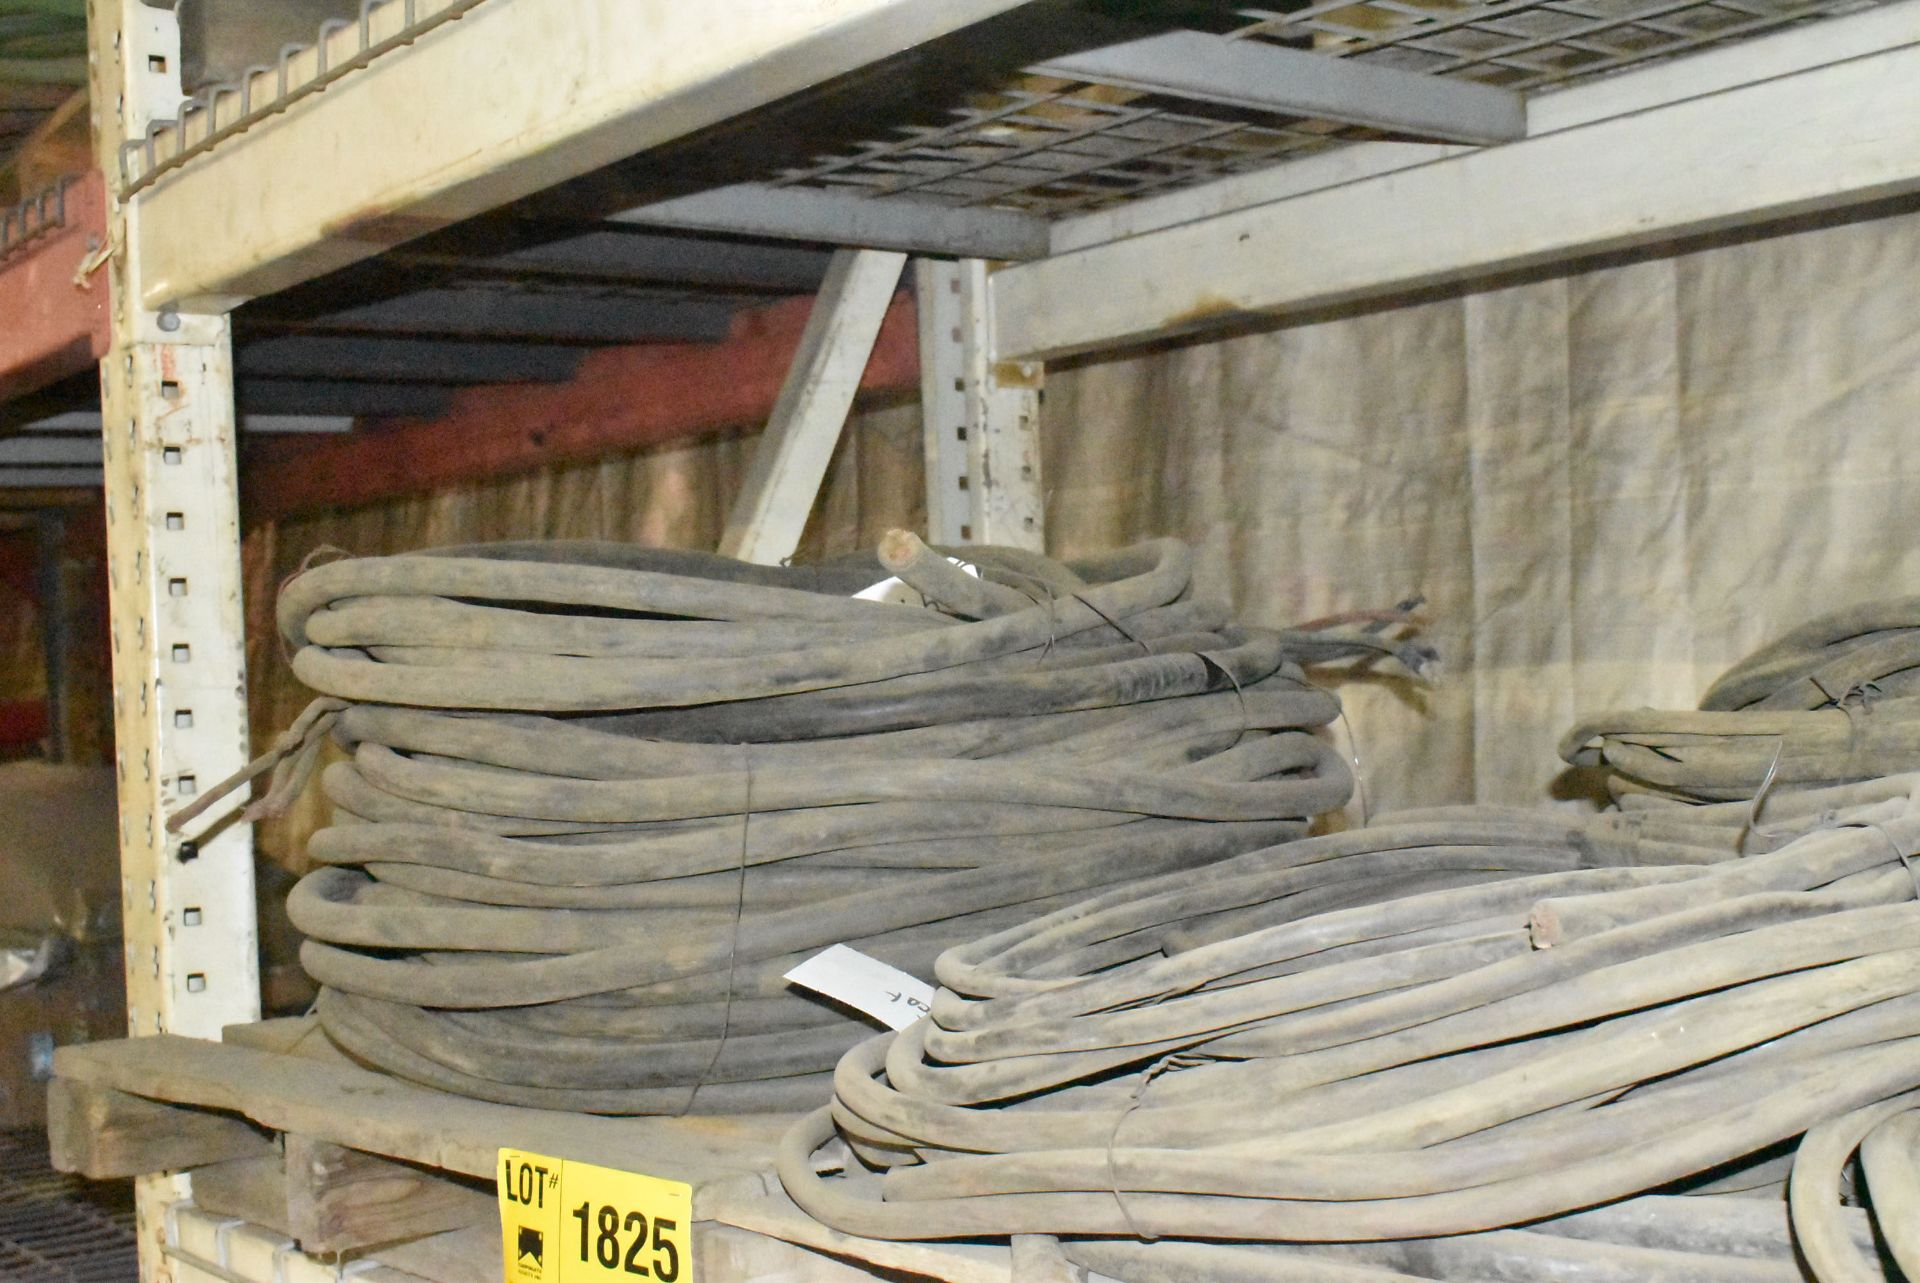 LOT/ CONTENTS OF SHELF - INCLUDING ELECTRICAL CABLE, WELDING CABLES, EXTENSION & TWIST PLUG CORDS [ - Image 6 of 6